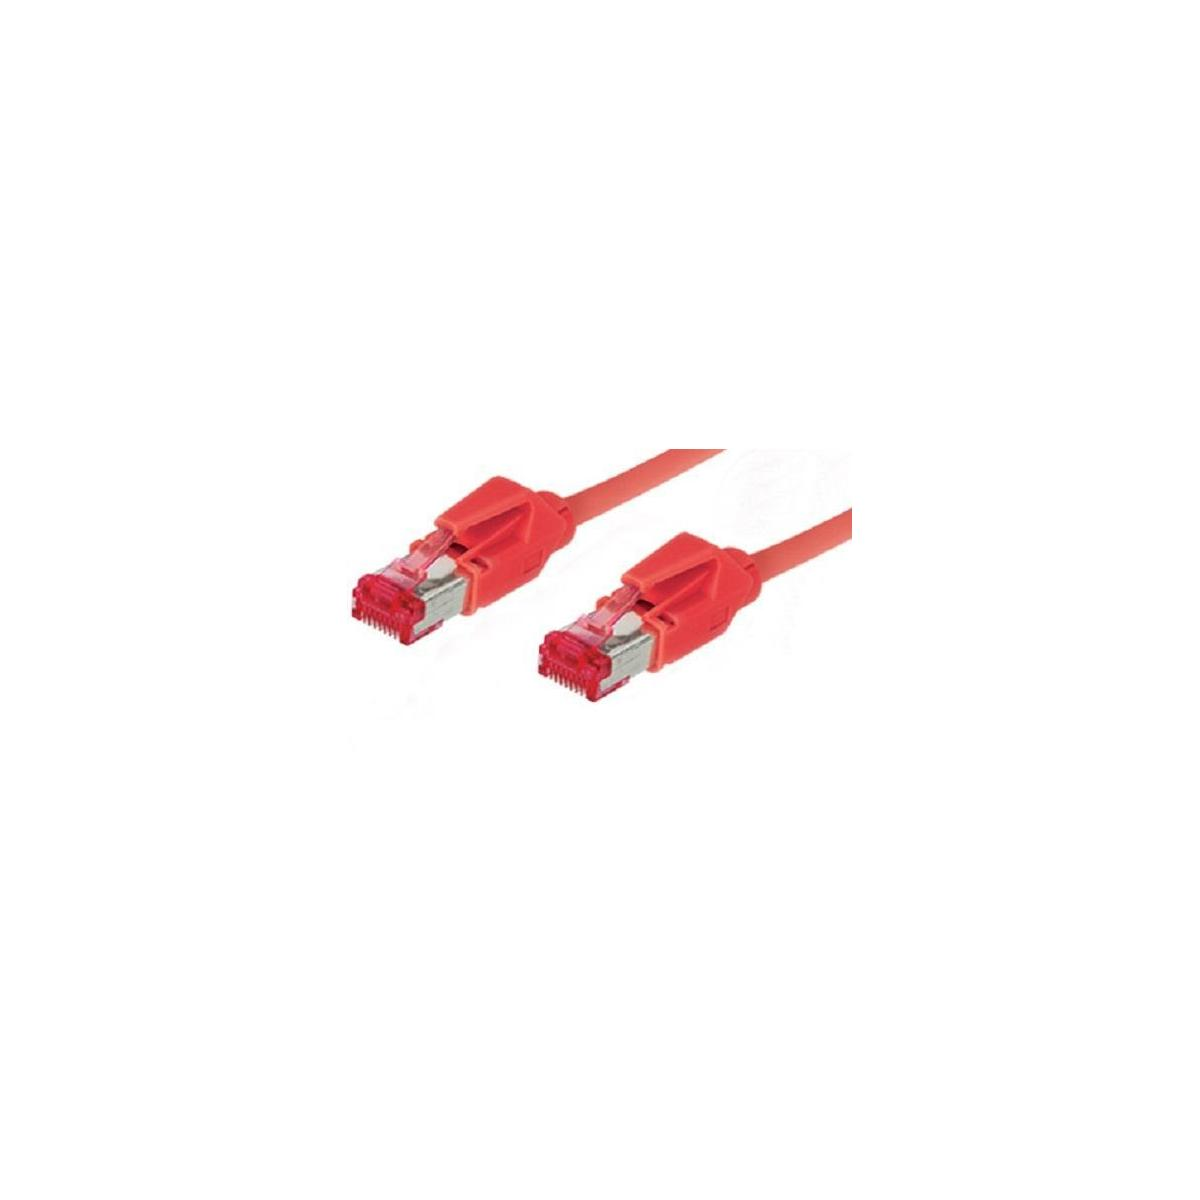 VARIA GROUP 8066-103R Patchkabel Cat.6, Rot